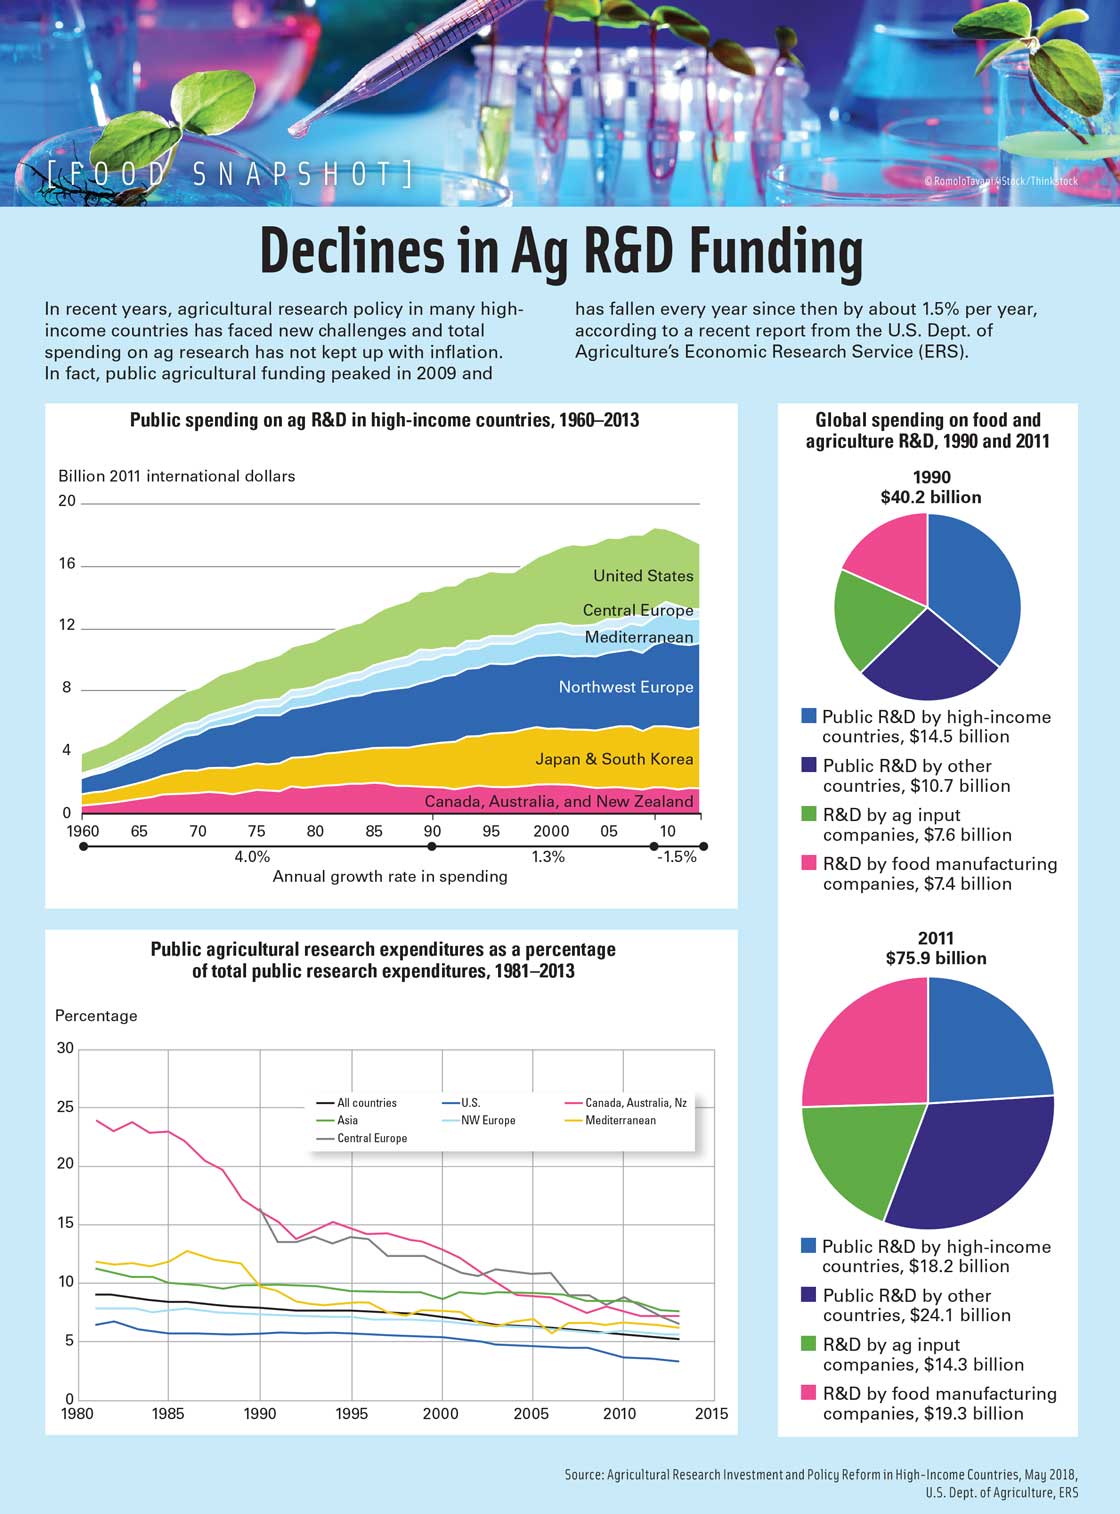 Declines in Ag R&D Funding